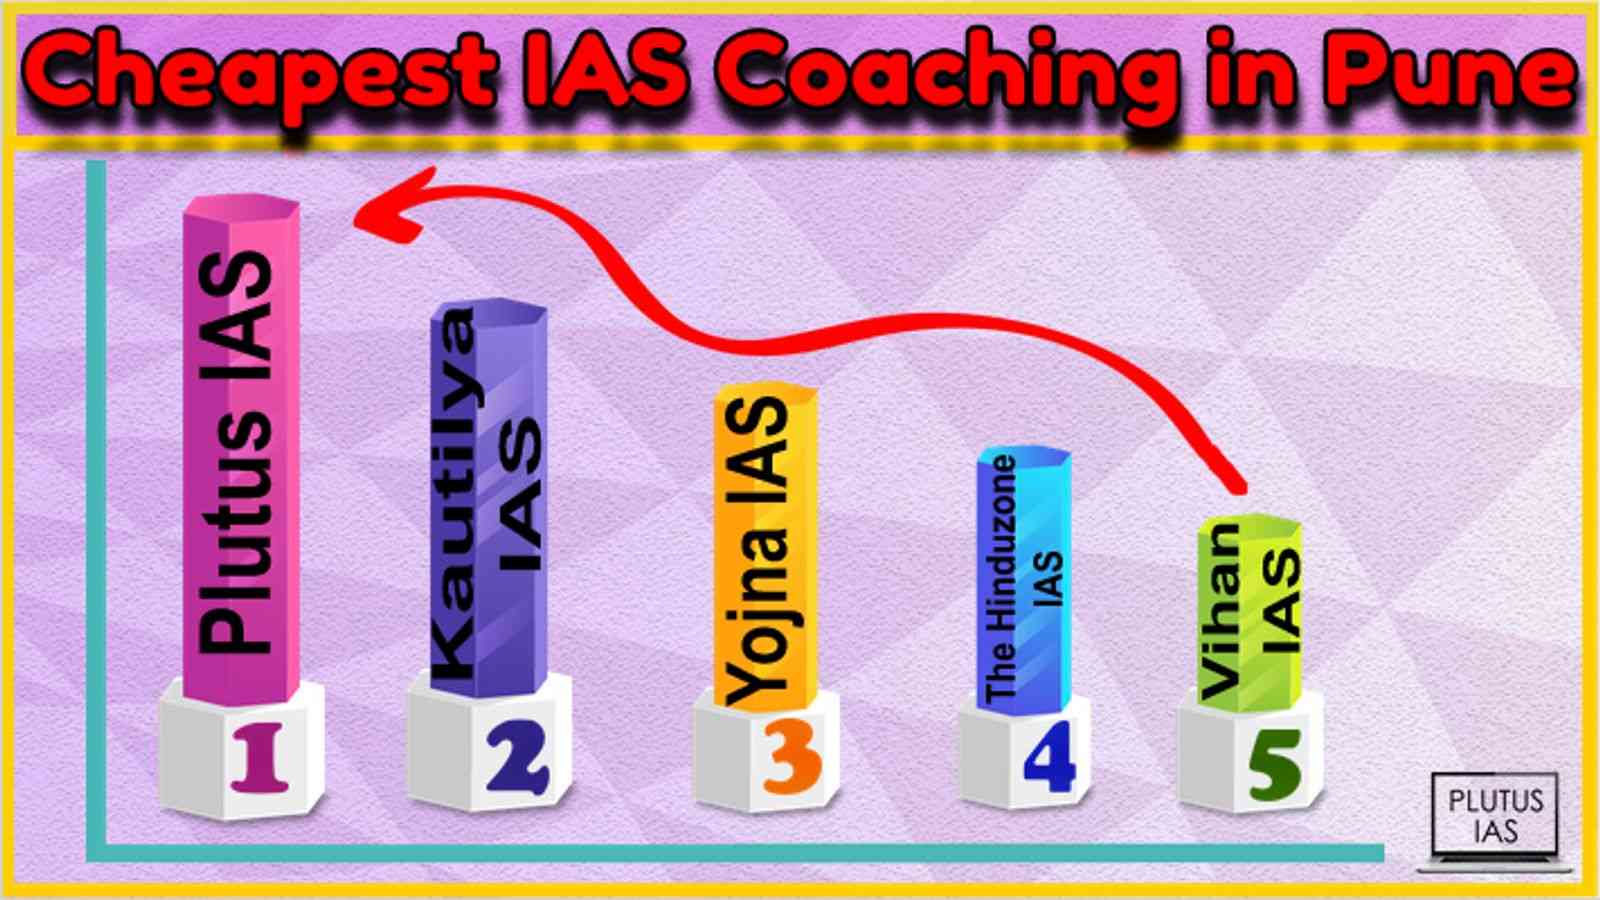 Cheapest IAS Coaching in Pune